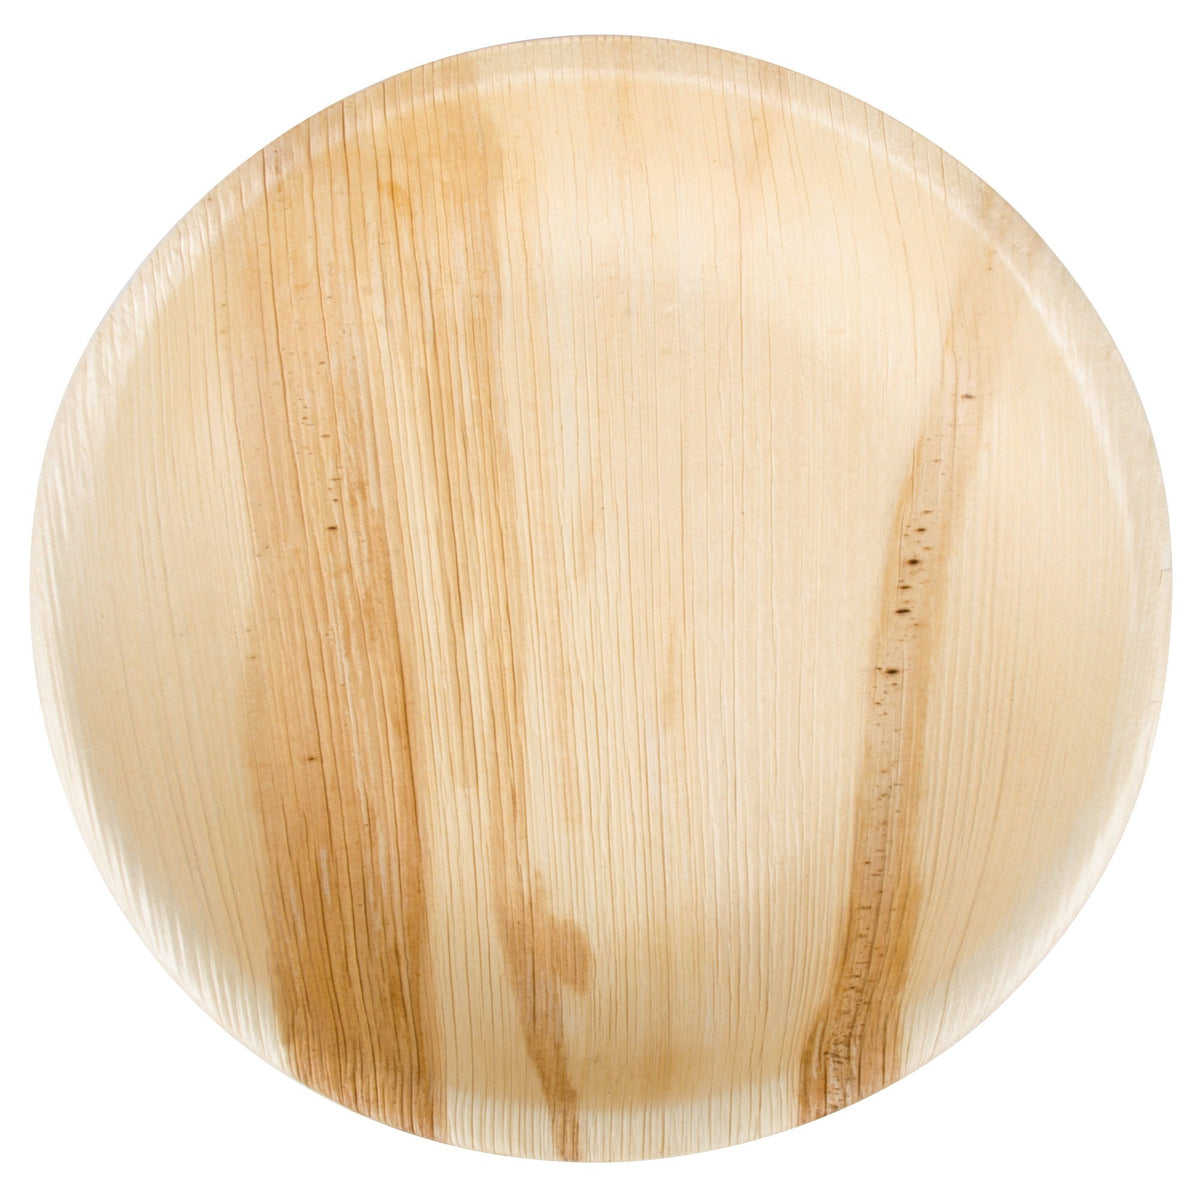 Palm Leaf Round Plates 10 Inch (Set of 25/50/100) - FREE US Shipping